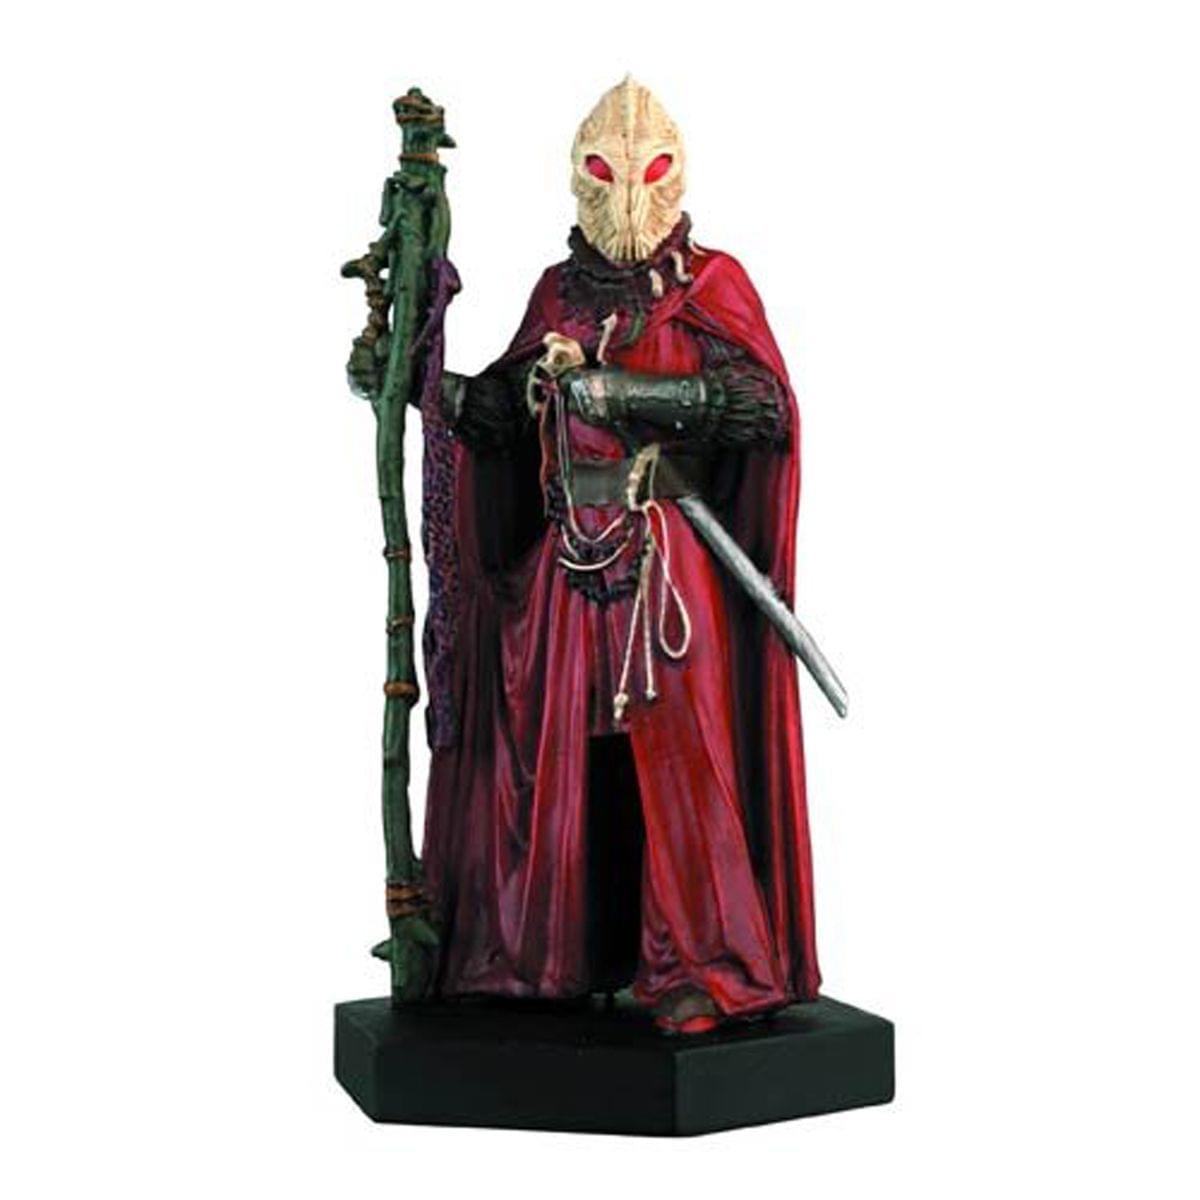 Doctor Who Sycrorax "The Christmas Invasion" 4" Resin Figure